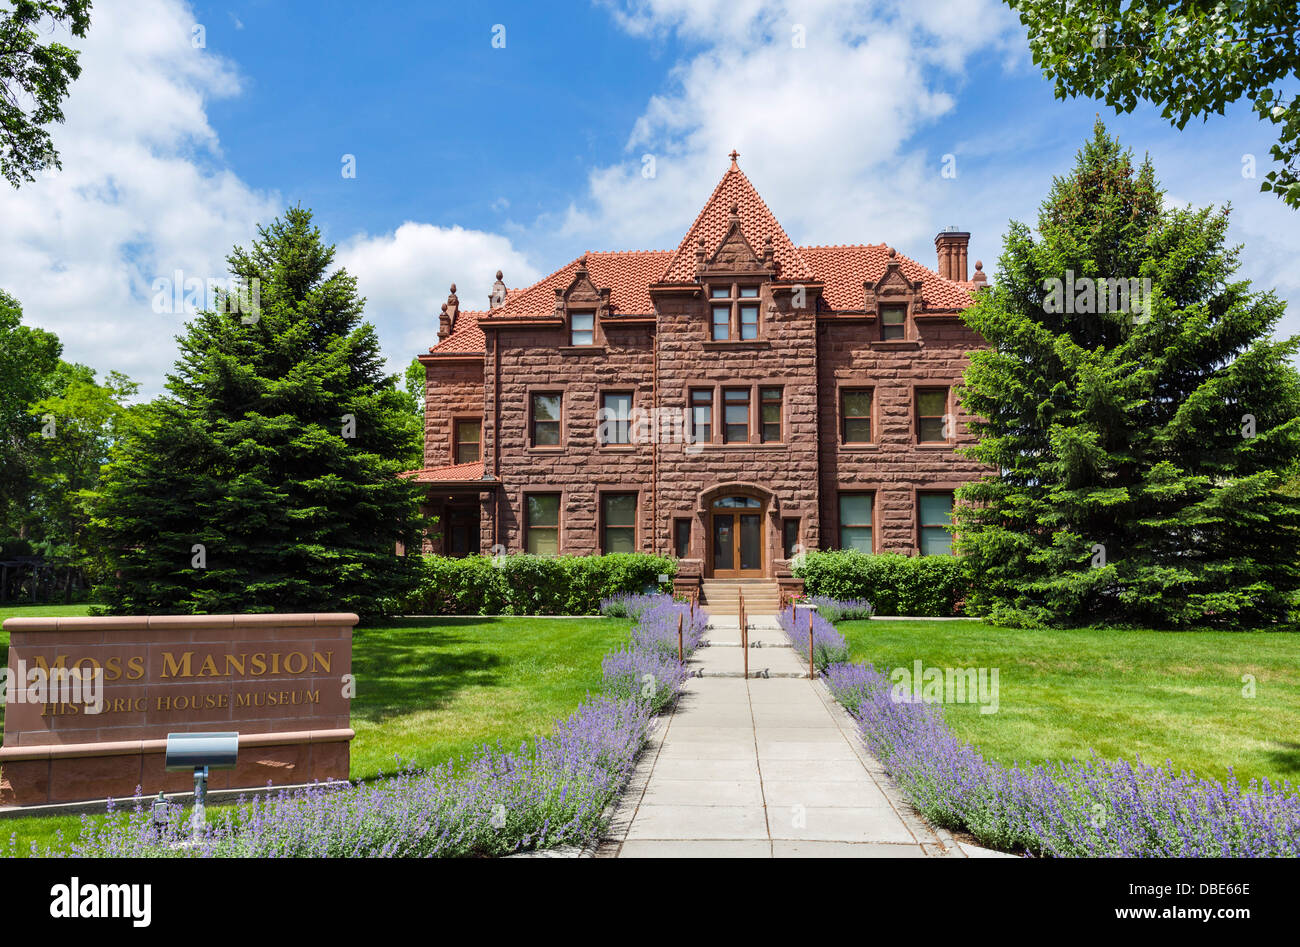 Moss Mansion Historic House Museum, Divisione Street, Billings, Montana, USA Foto Stock